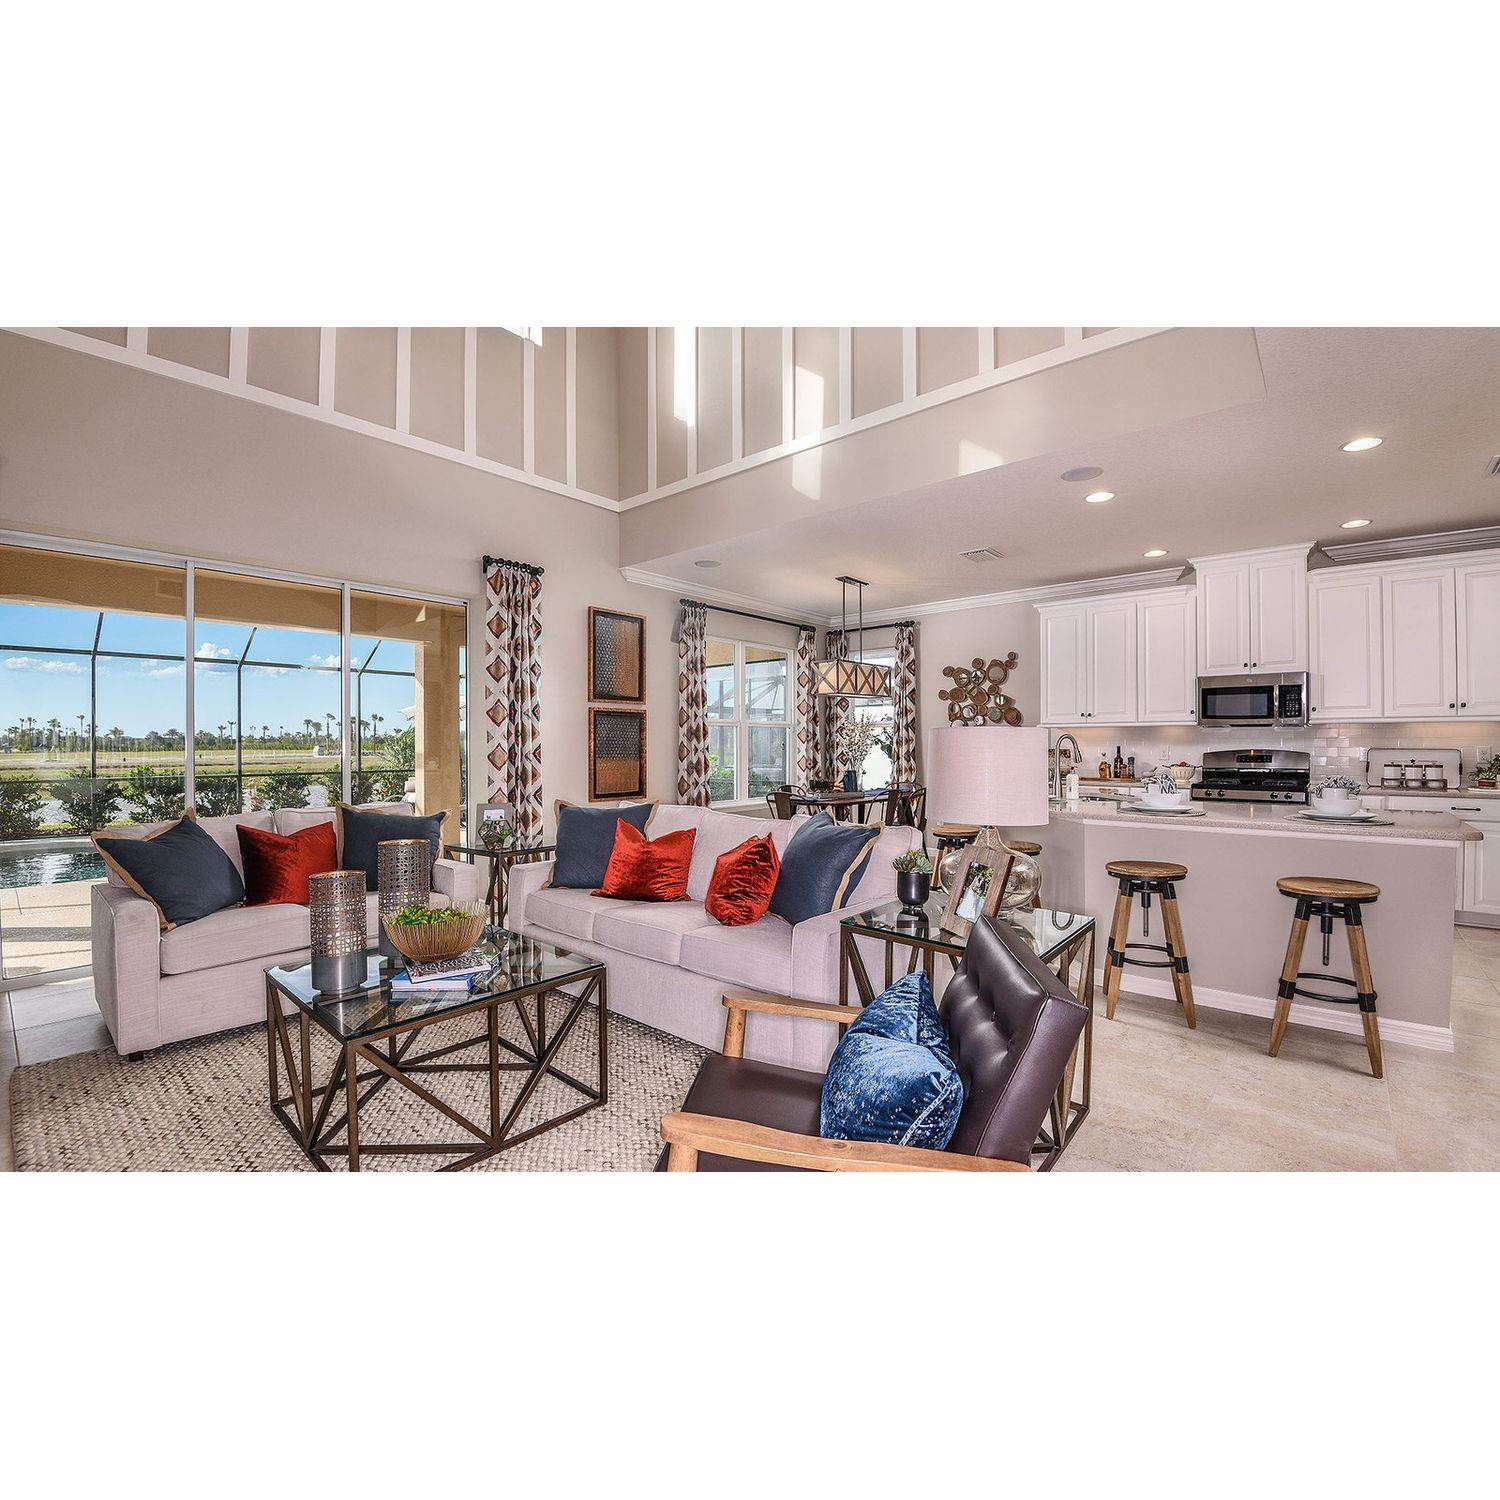 19. Eave's Bend at Artisan Lakes building at 5967 Maidenstone Way, Palmetto, FL 34221